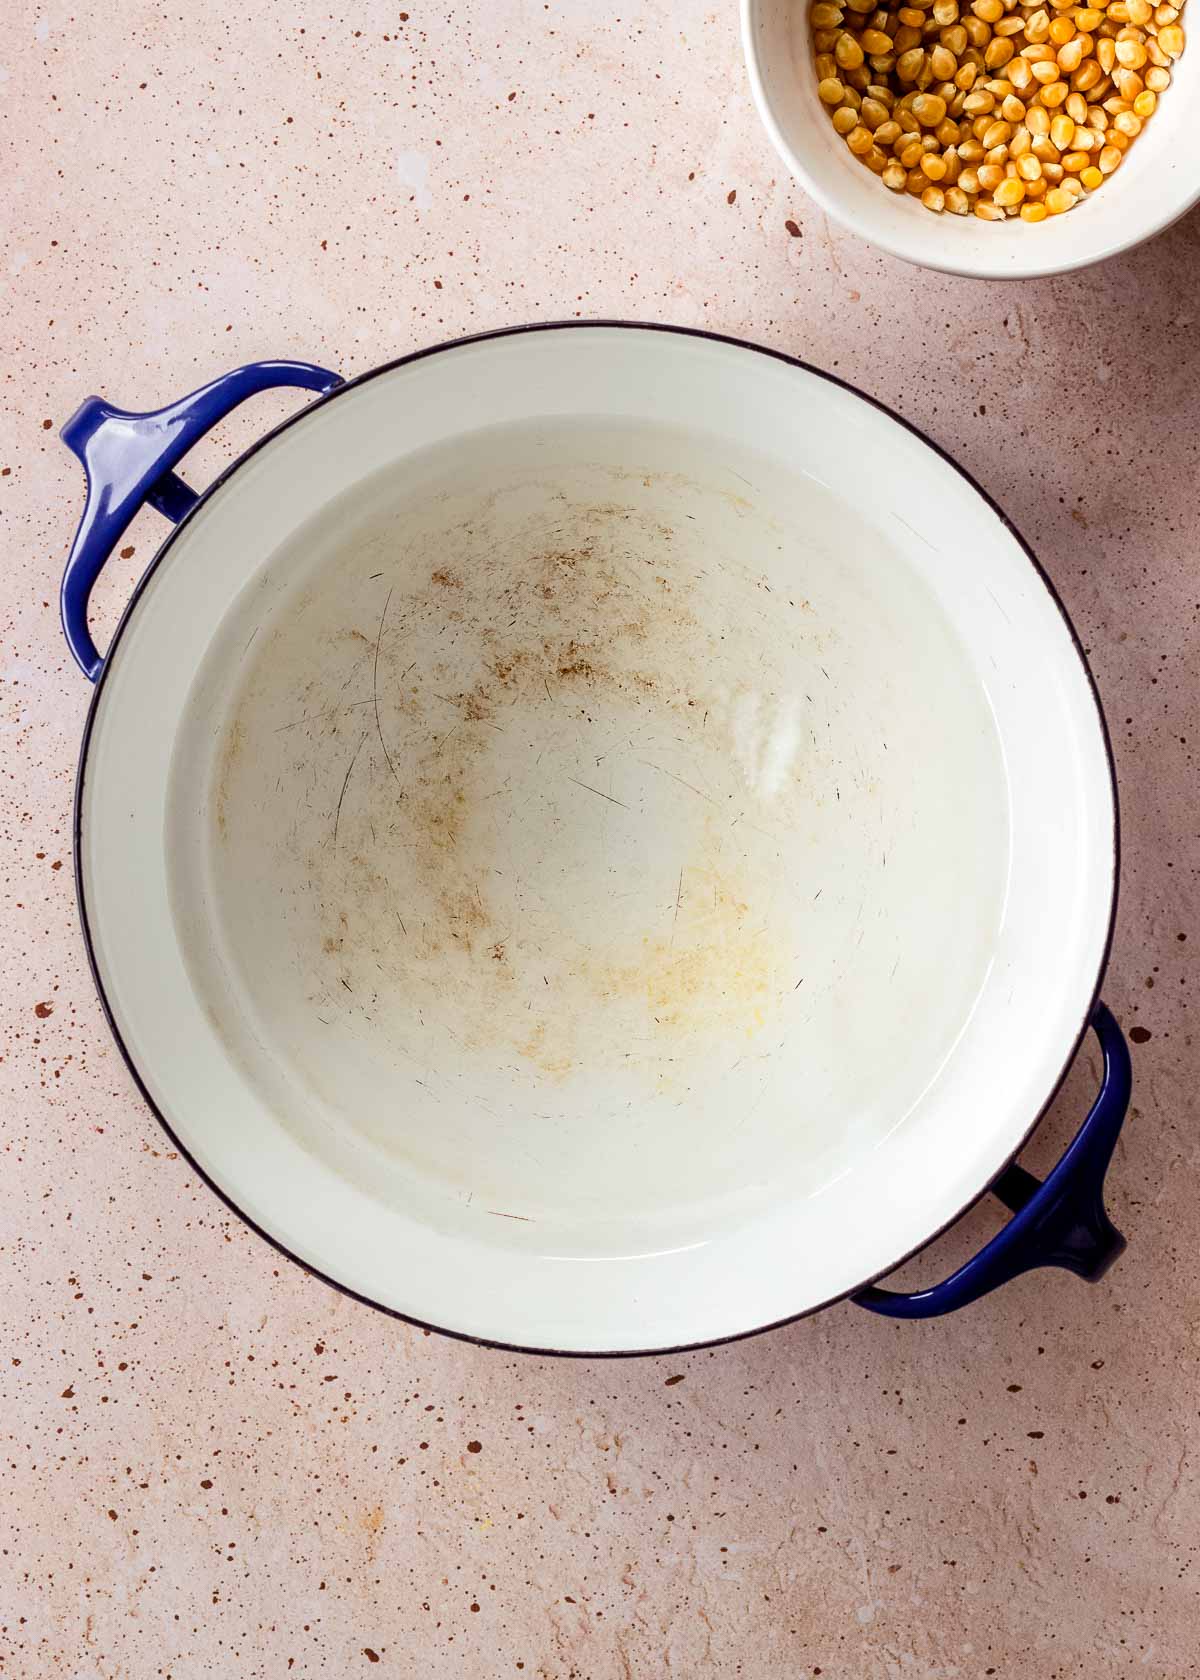 A large pot containing melted hot coconut oil. A small bowl of corn kernels sits nearby.